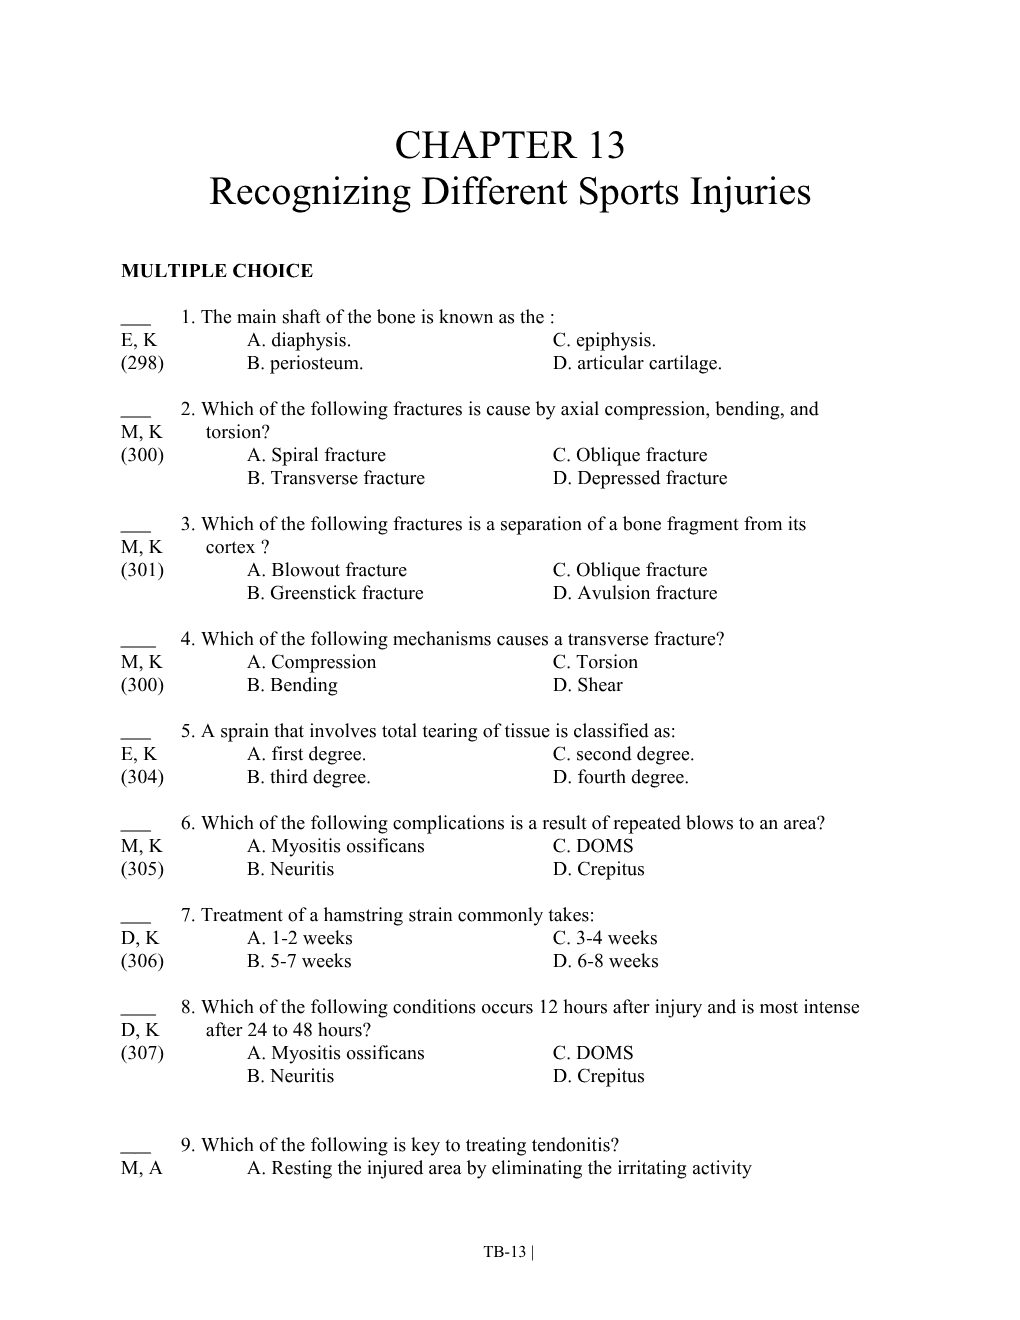 Recognizing Different Sports Injuries